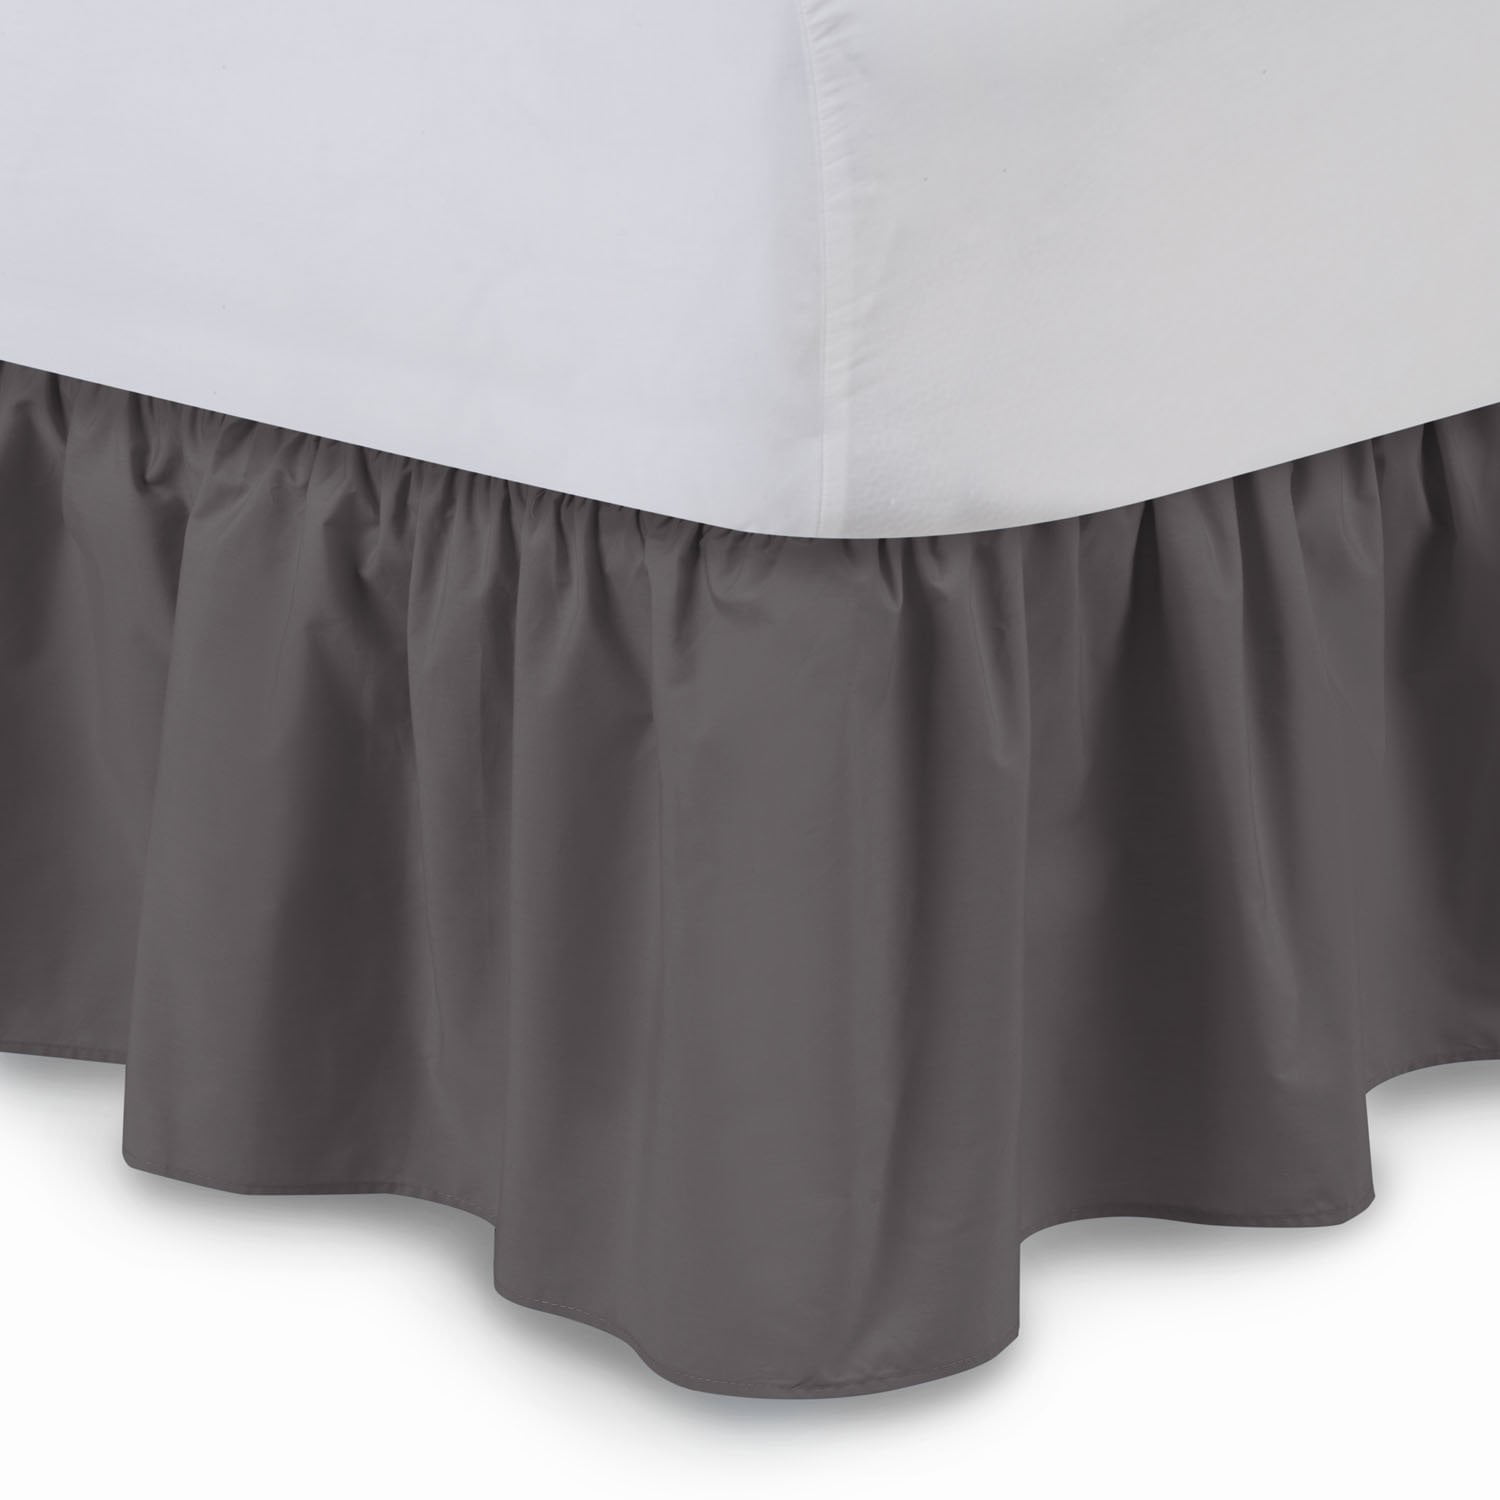 Ruffled Bed Skirt (Cal King, Hunter) 14 Inch Drop Dust Ruffle with ...